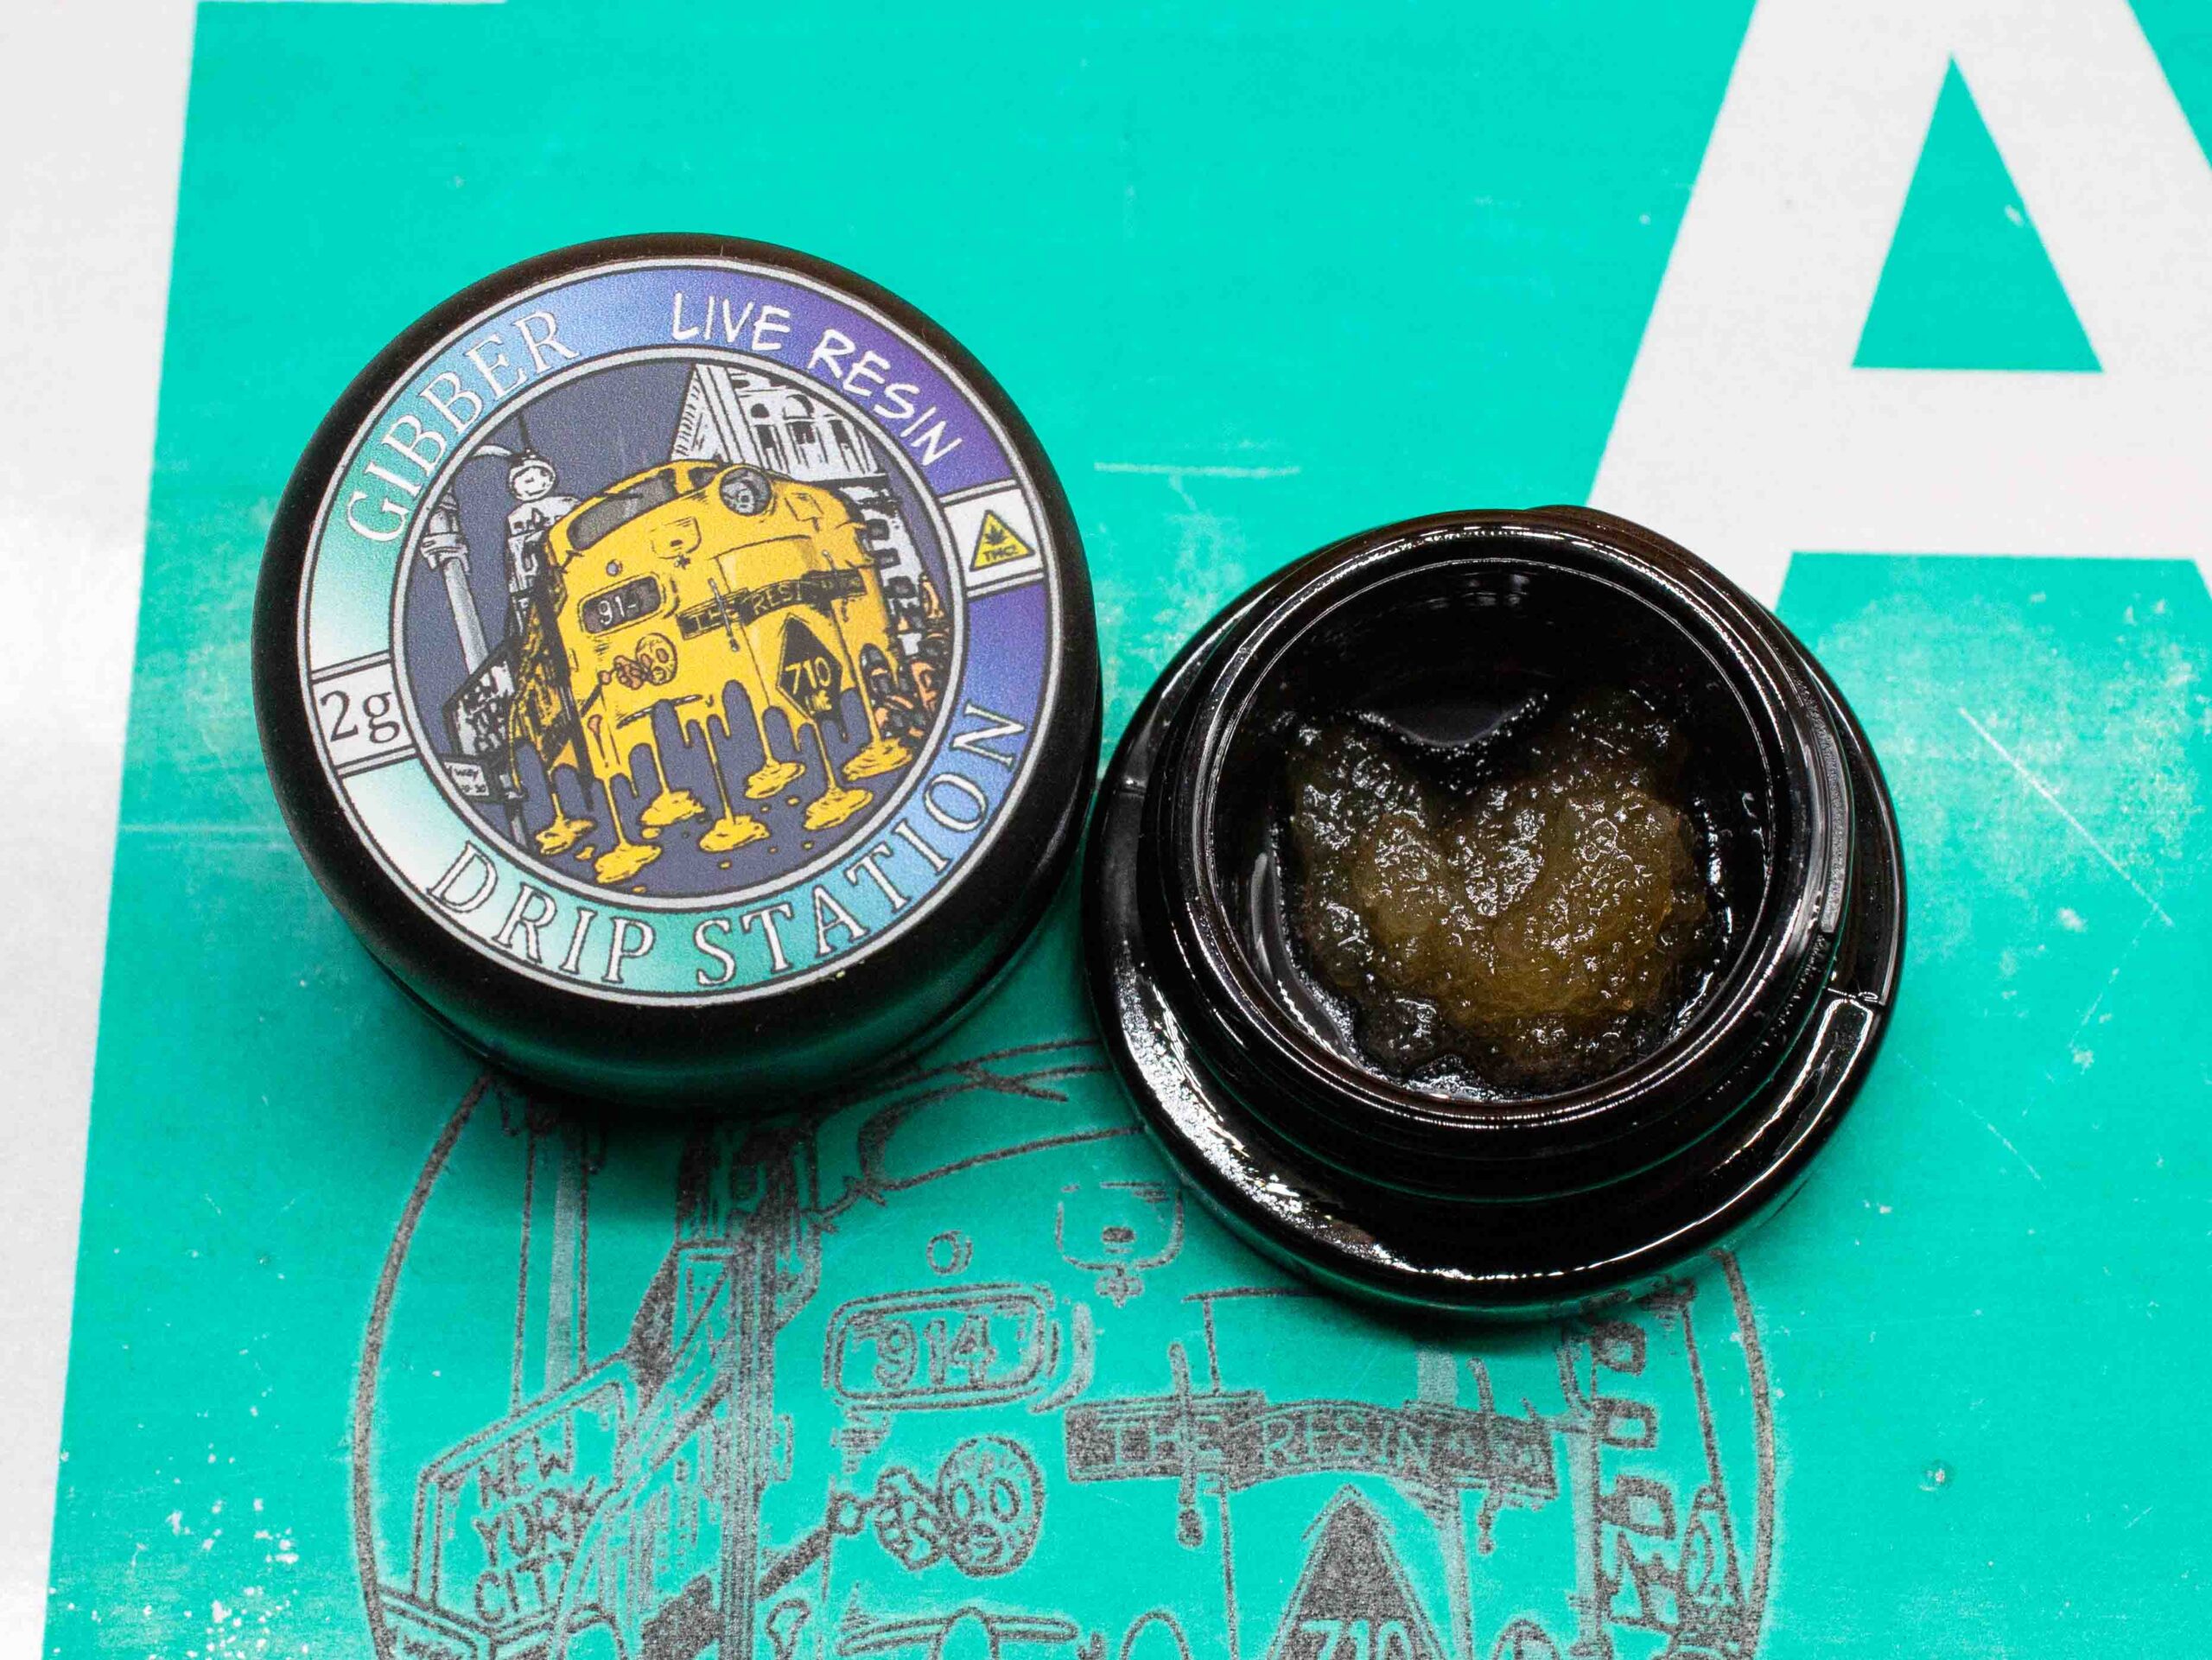 Drip Station 2g Live Resin SW